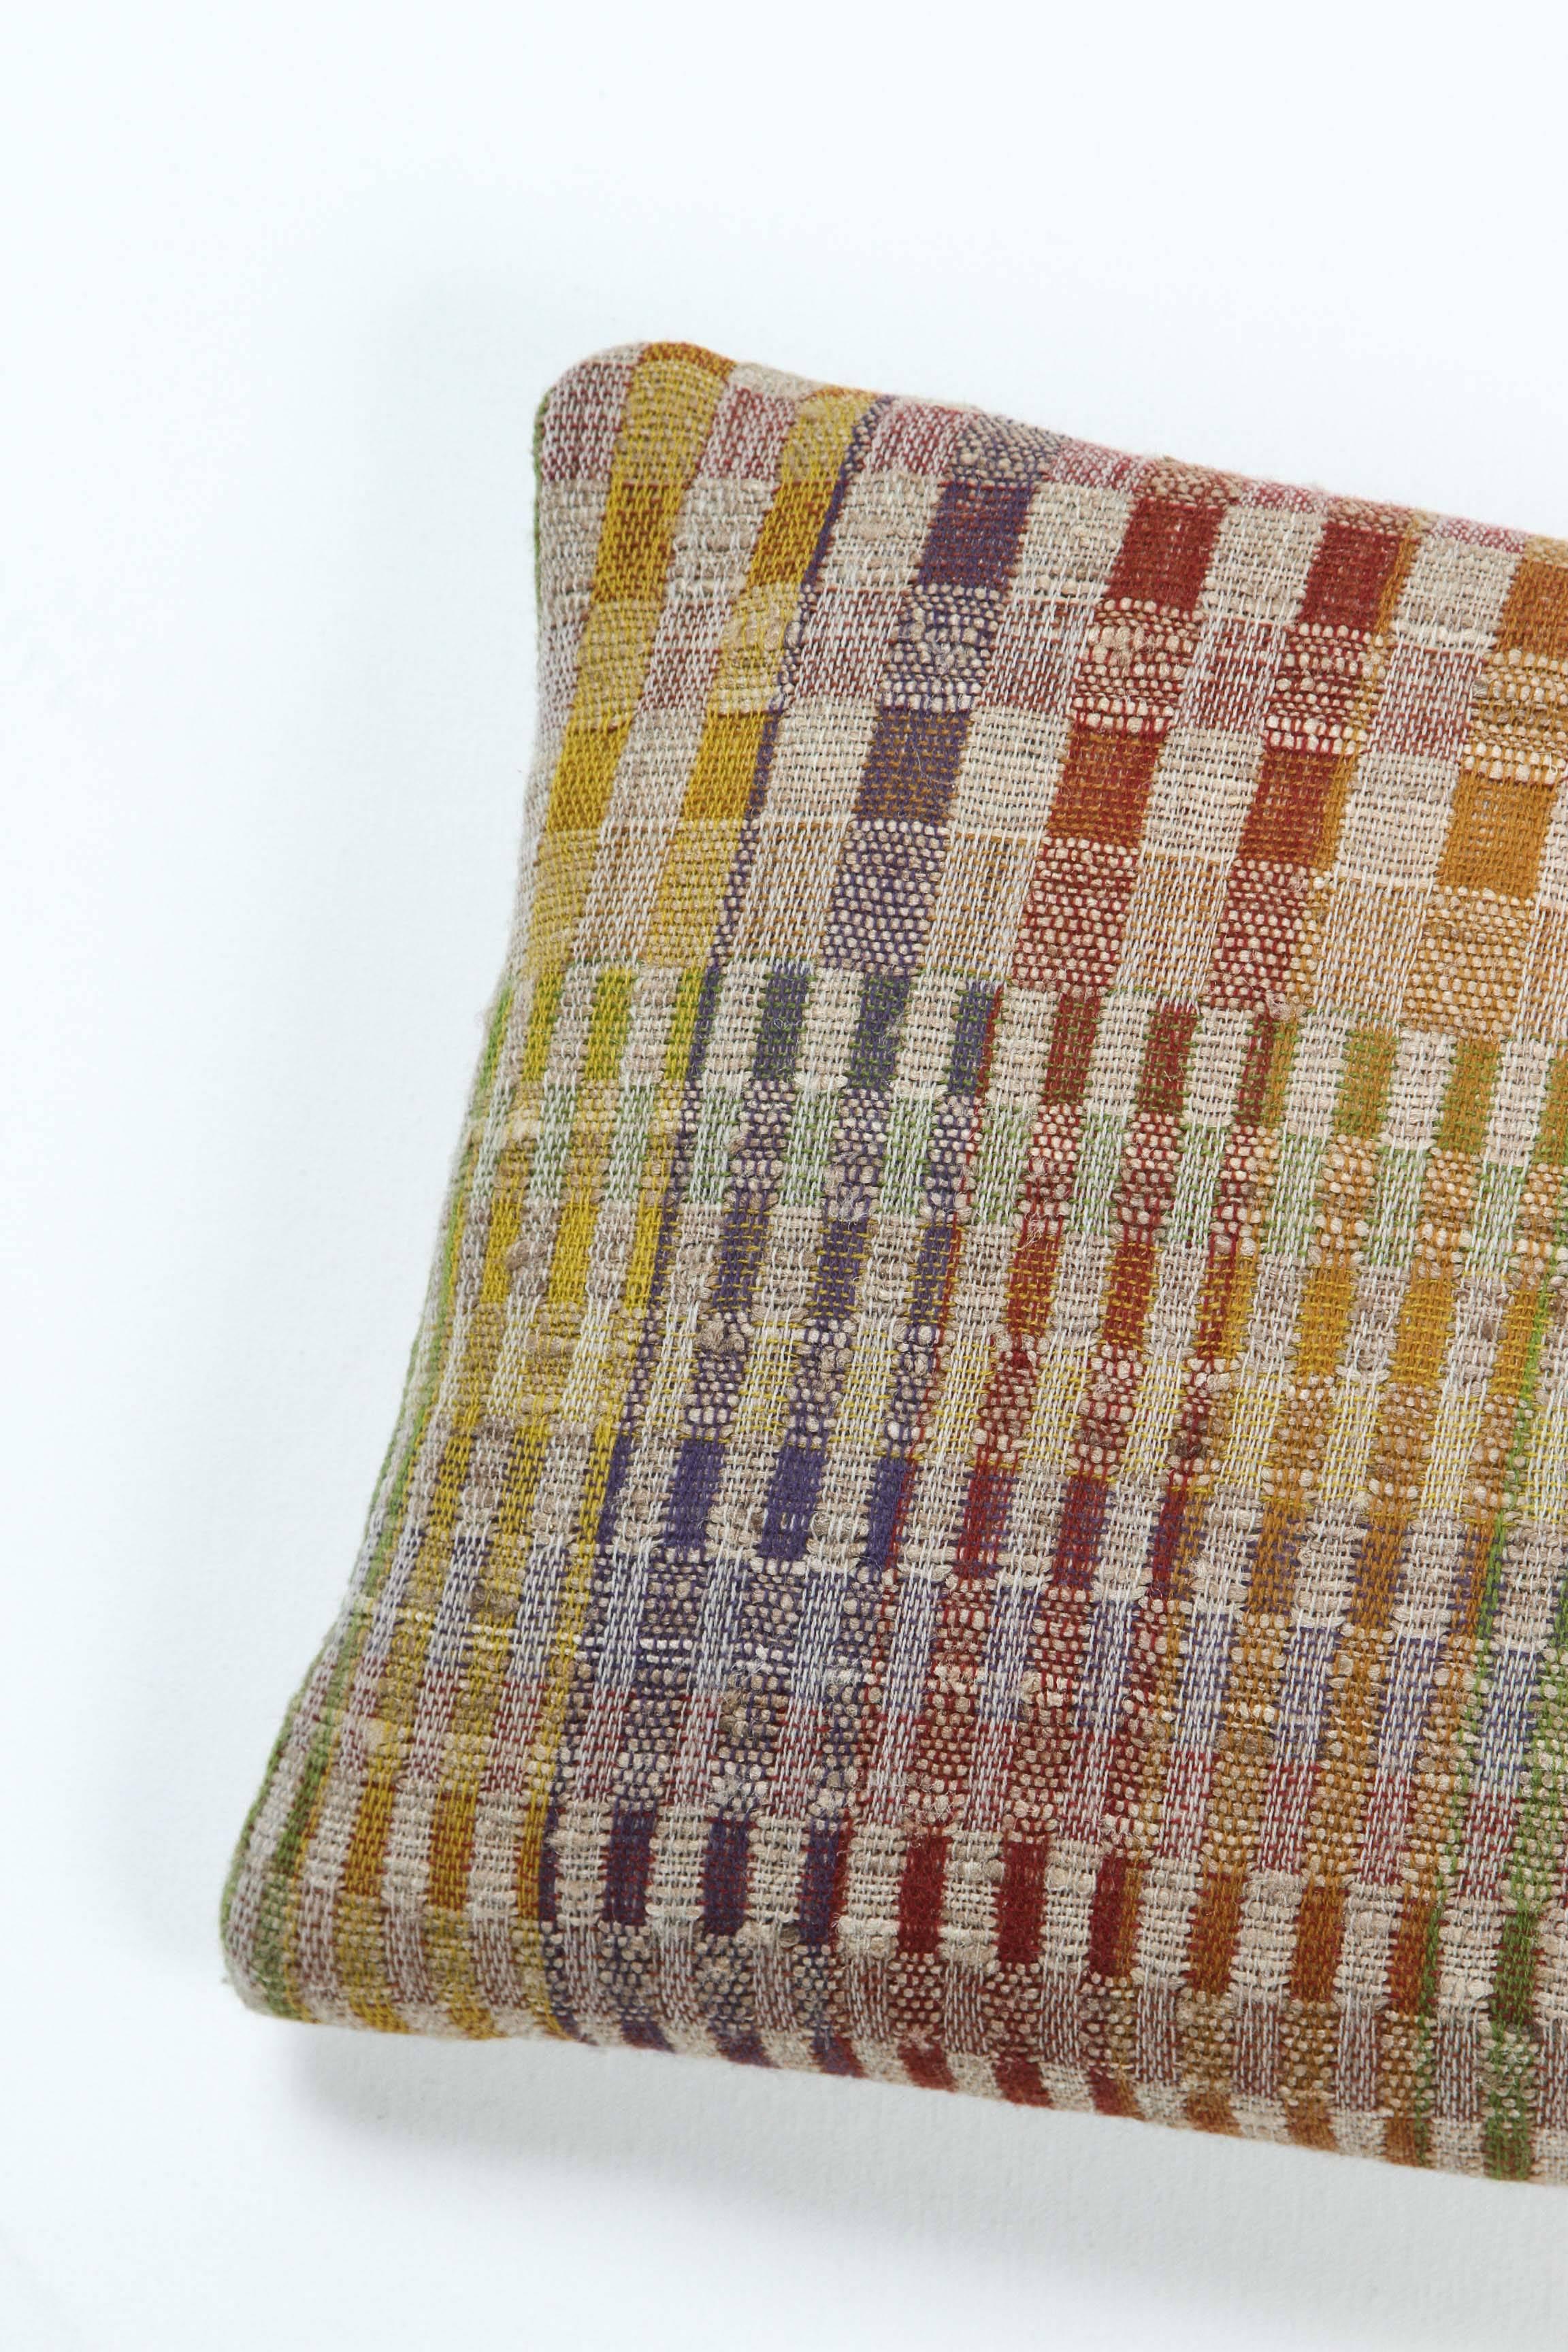 Pat McGann Workshop

A contemporary line of cushions, pillows, throws, bedcovers, bedspreads and yardage handwoven in India on antique jacquard looms. Handspun wool, cotton, linen and raw silk give the textiles an appealing uneven quality.

This